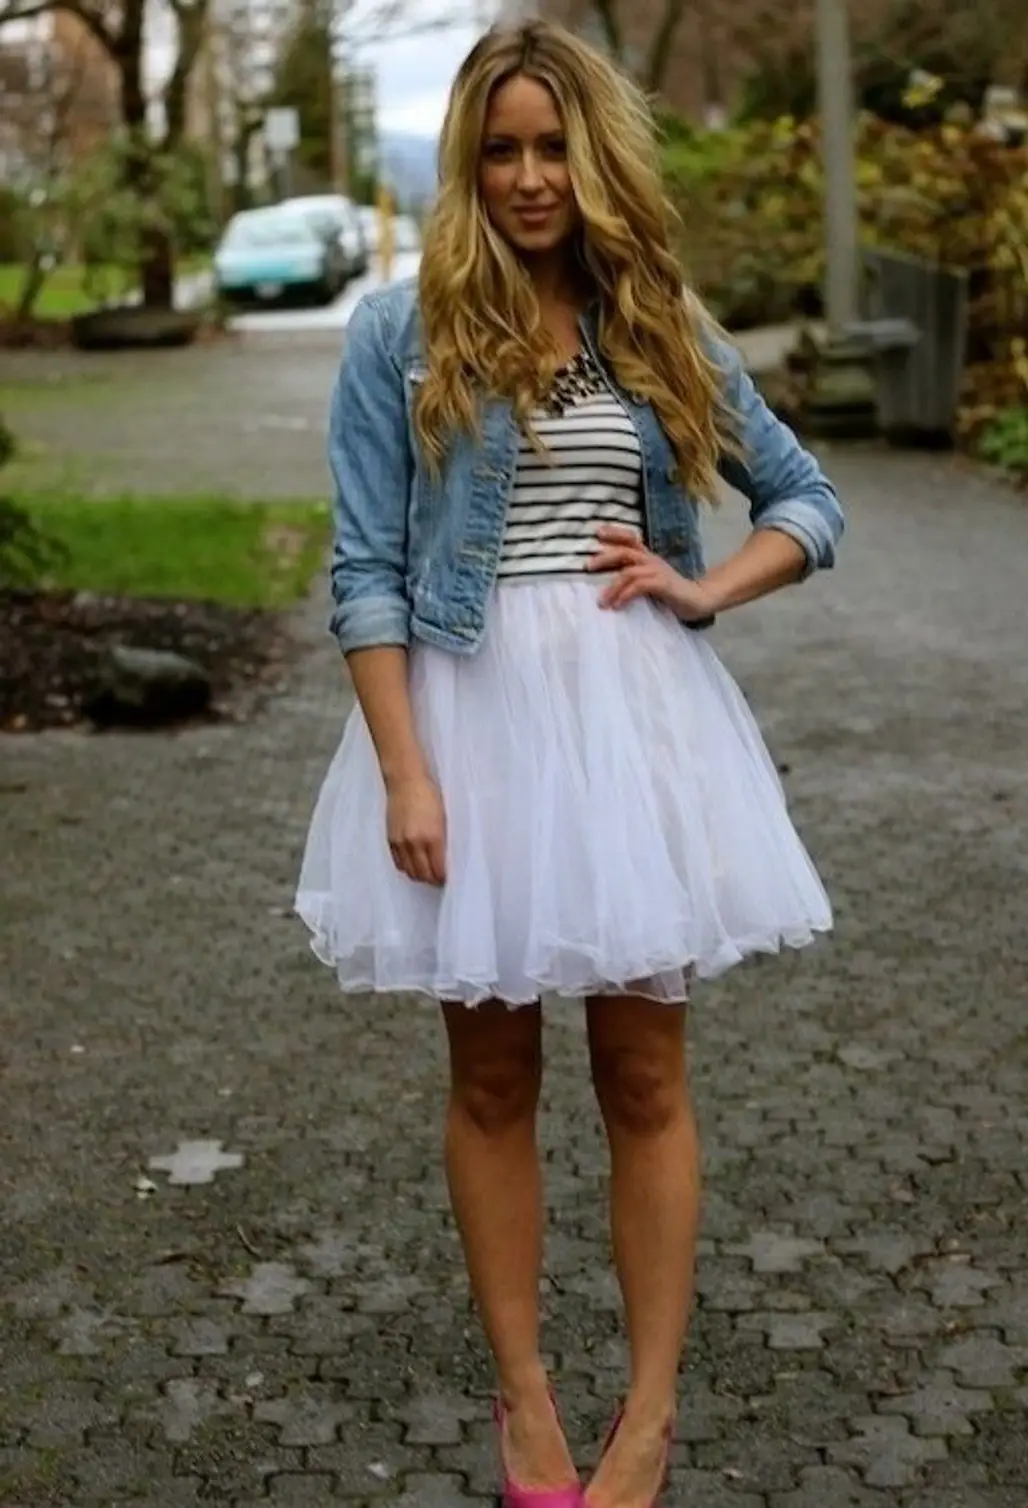 Concert outfit ideas  Tennis skirt outfit, Tulle skirts outfit